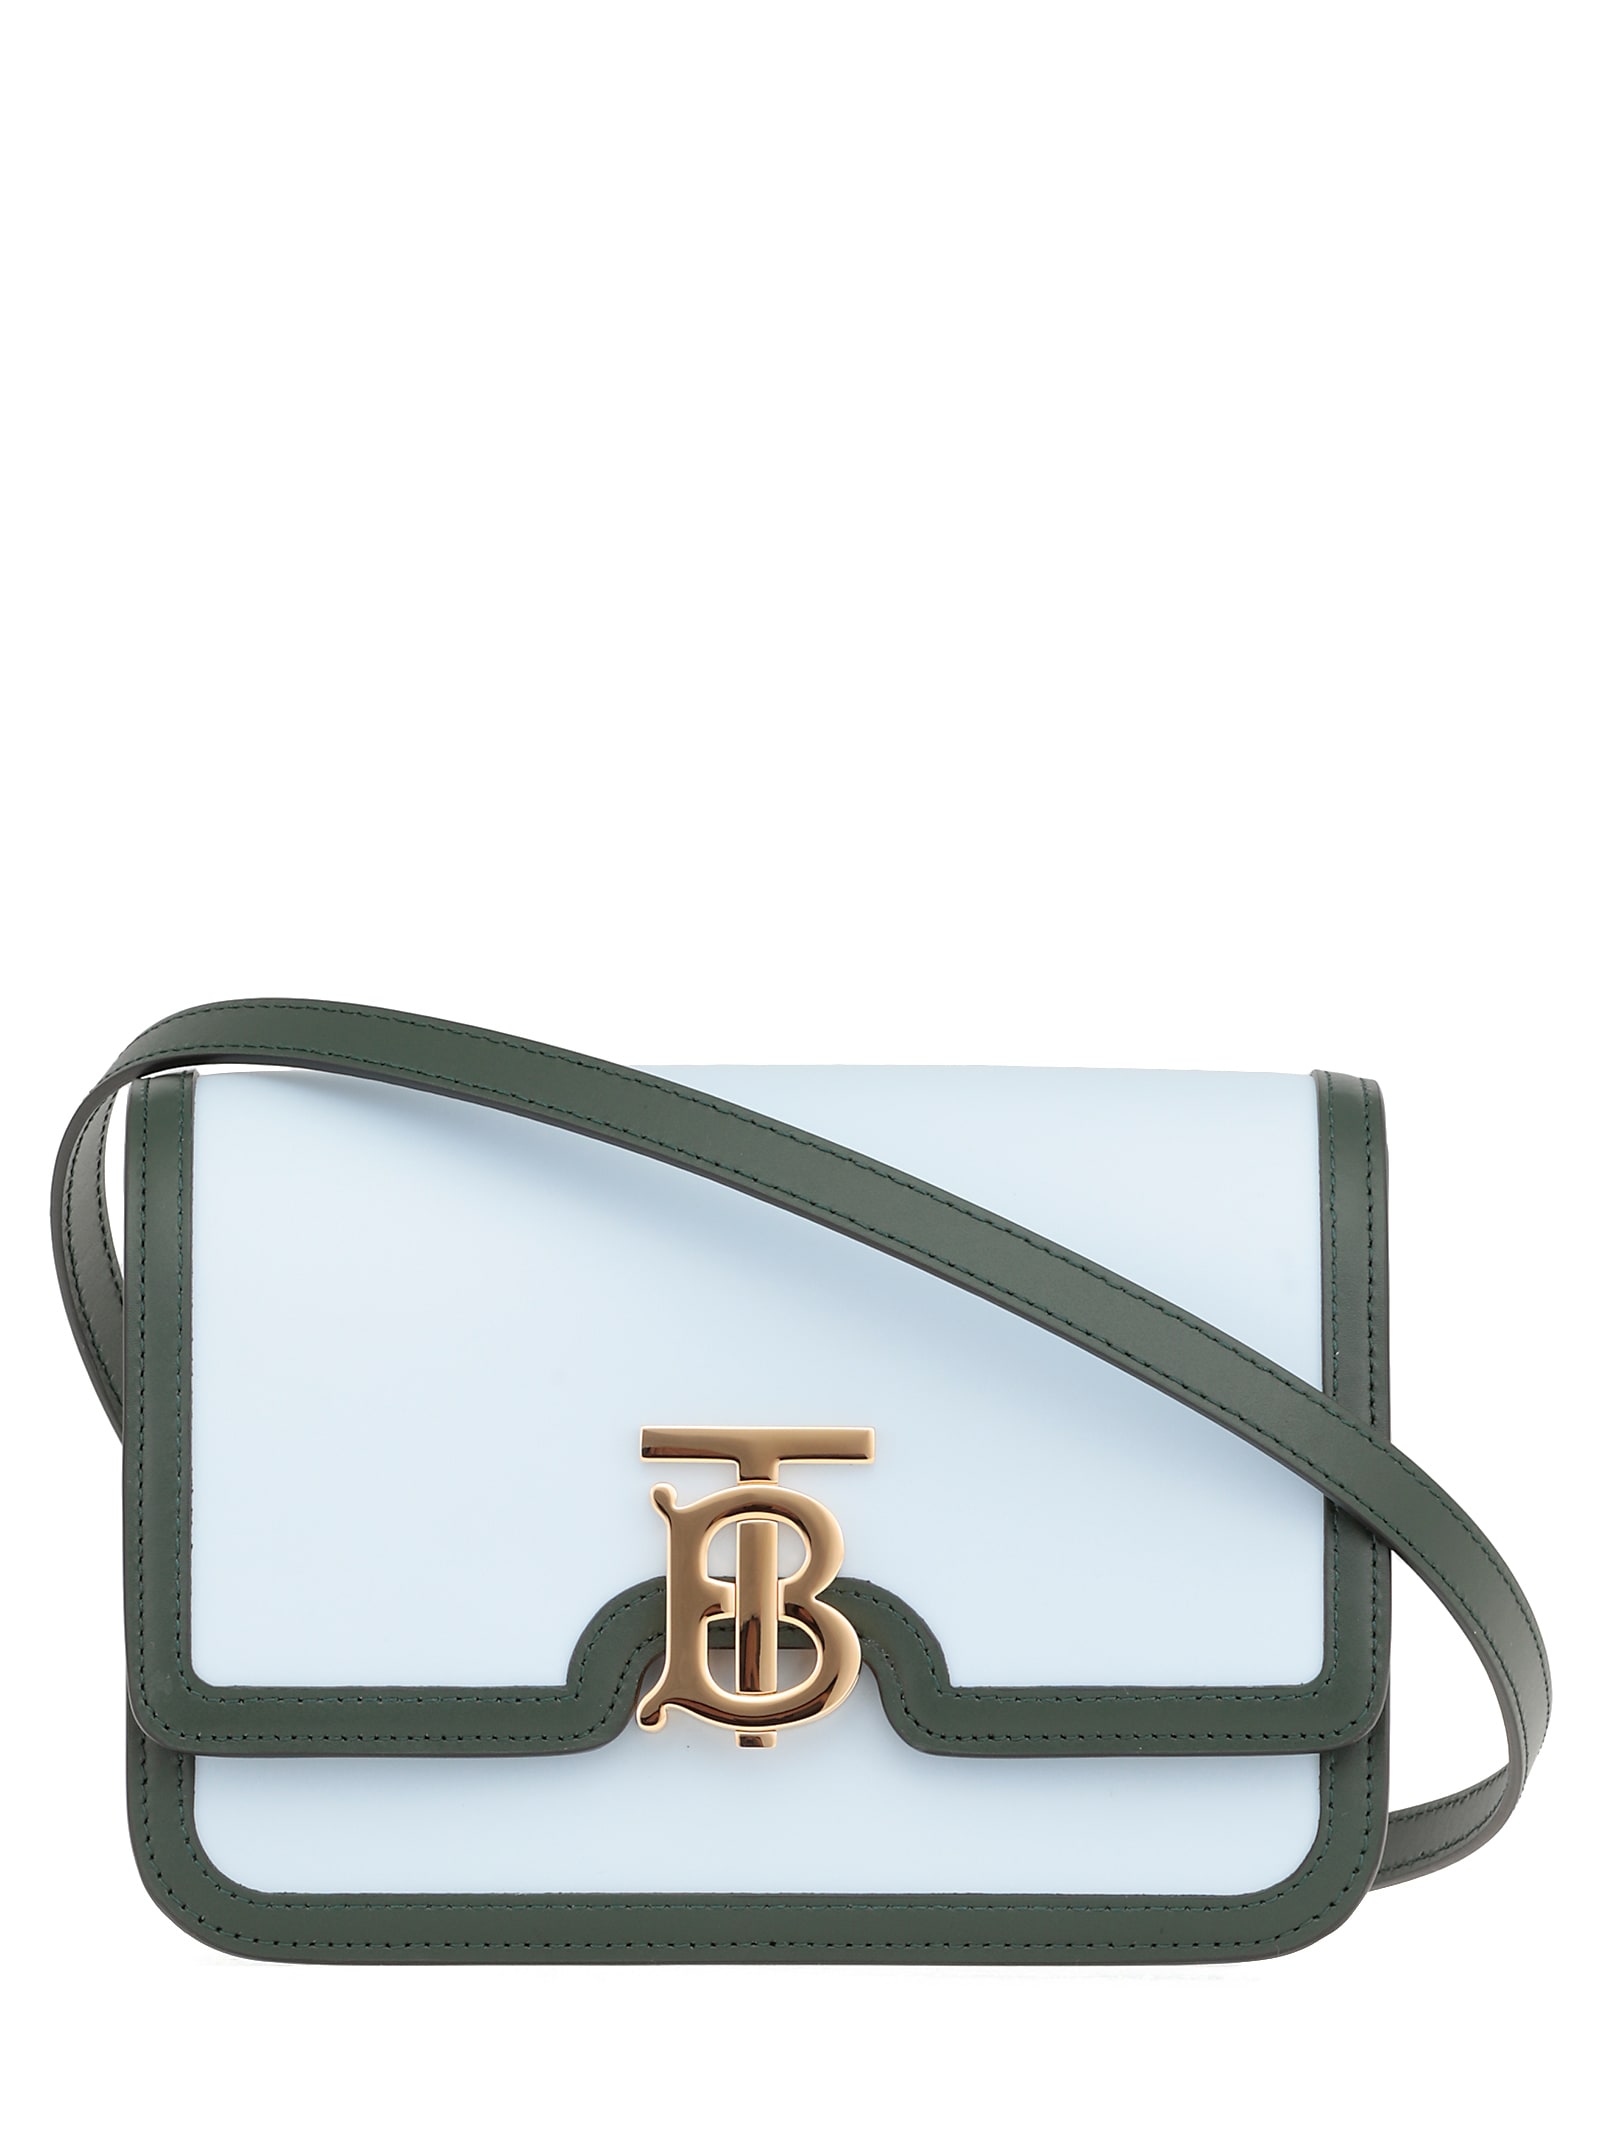 Burberry Small Tb Bag In Blue / Pine Green